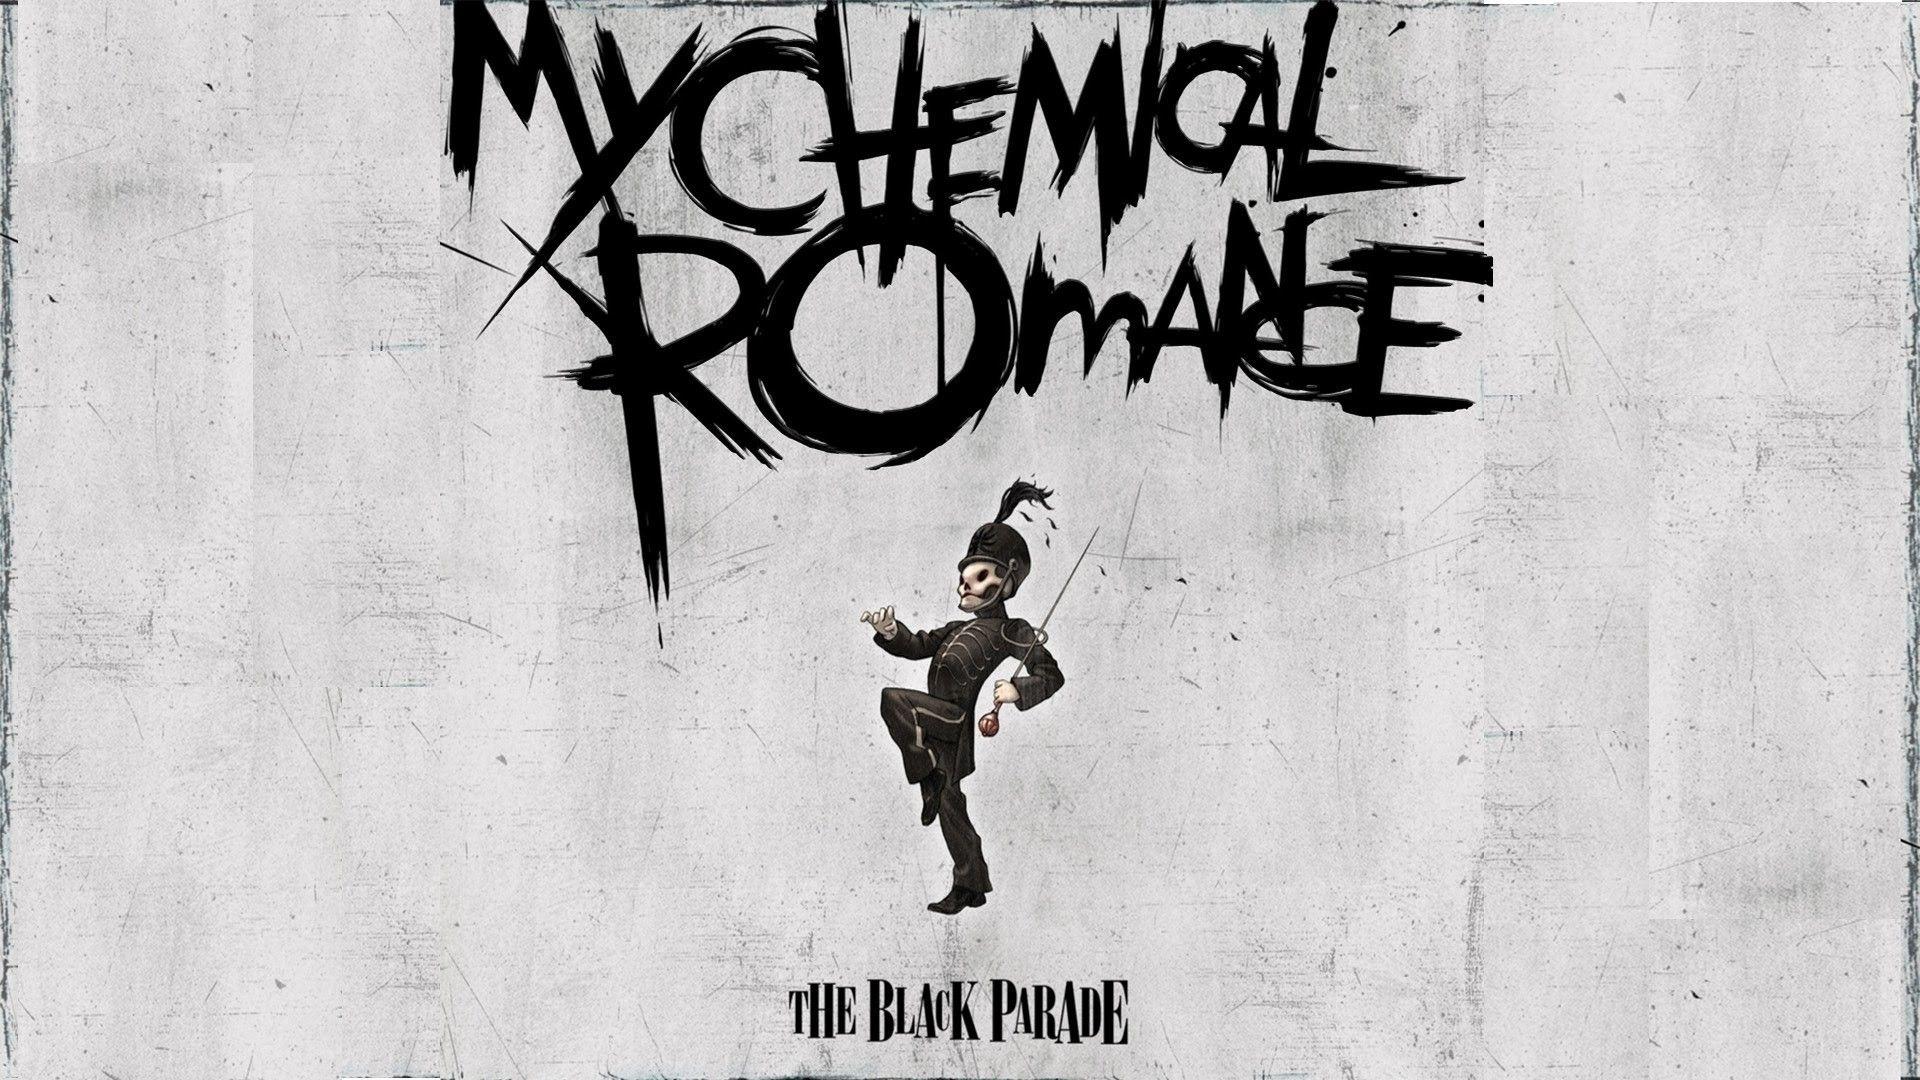 My Chemical Romance Wallpapers on WallpaperDog